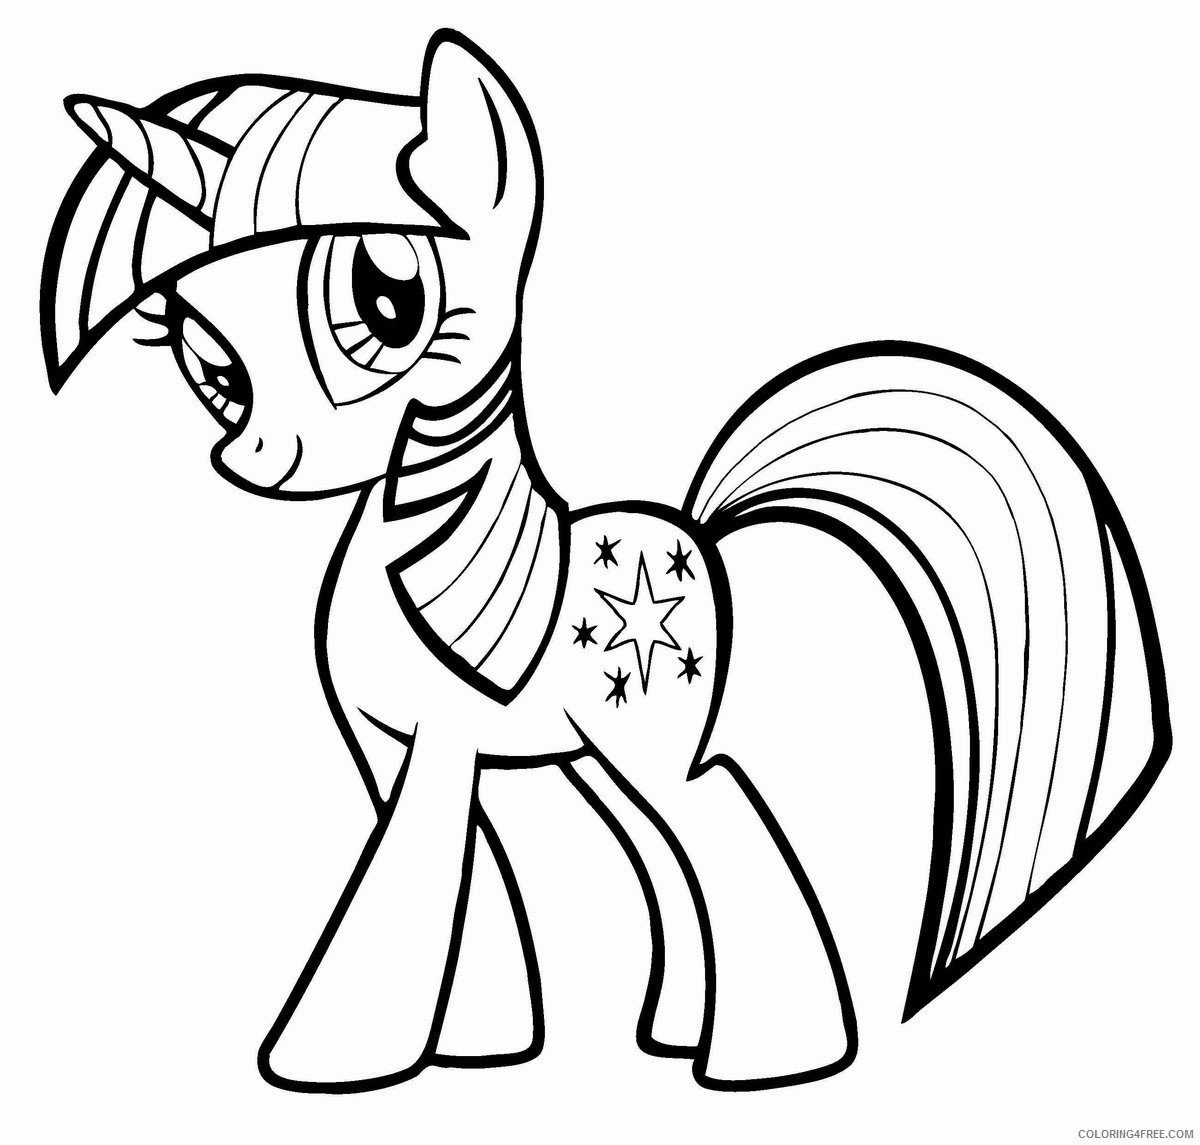 My Little Pony Coloring Pages Cartoons my little pony 20 Printable 2020 4466 Coloring4free